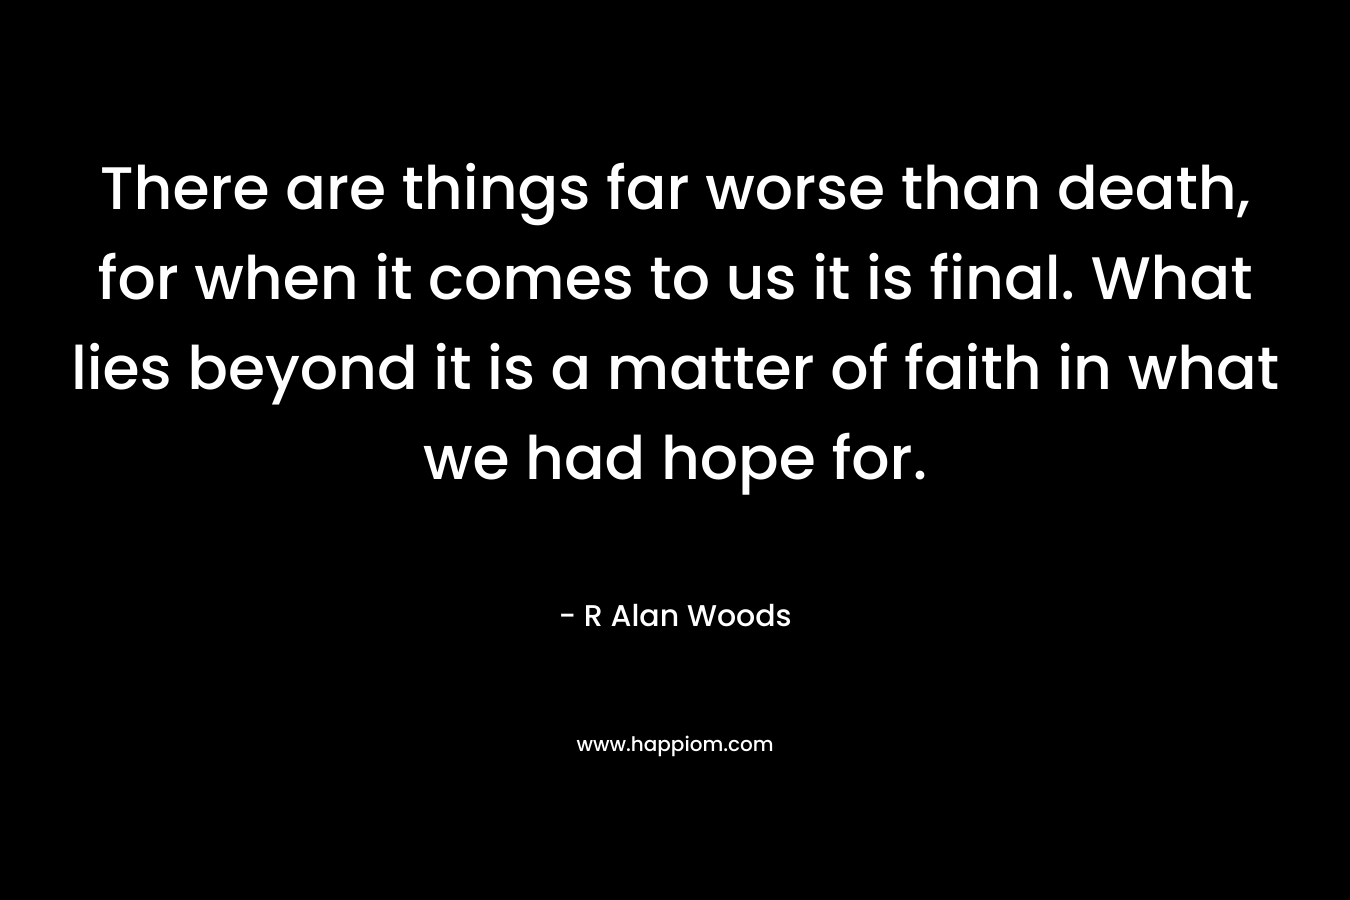 There are things far worse than death, for when it comes to us it is final. What lies beyond it is a matter of faith in what we had hope for.